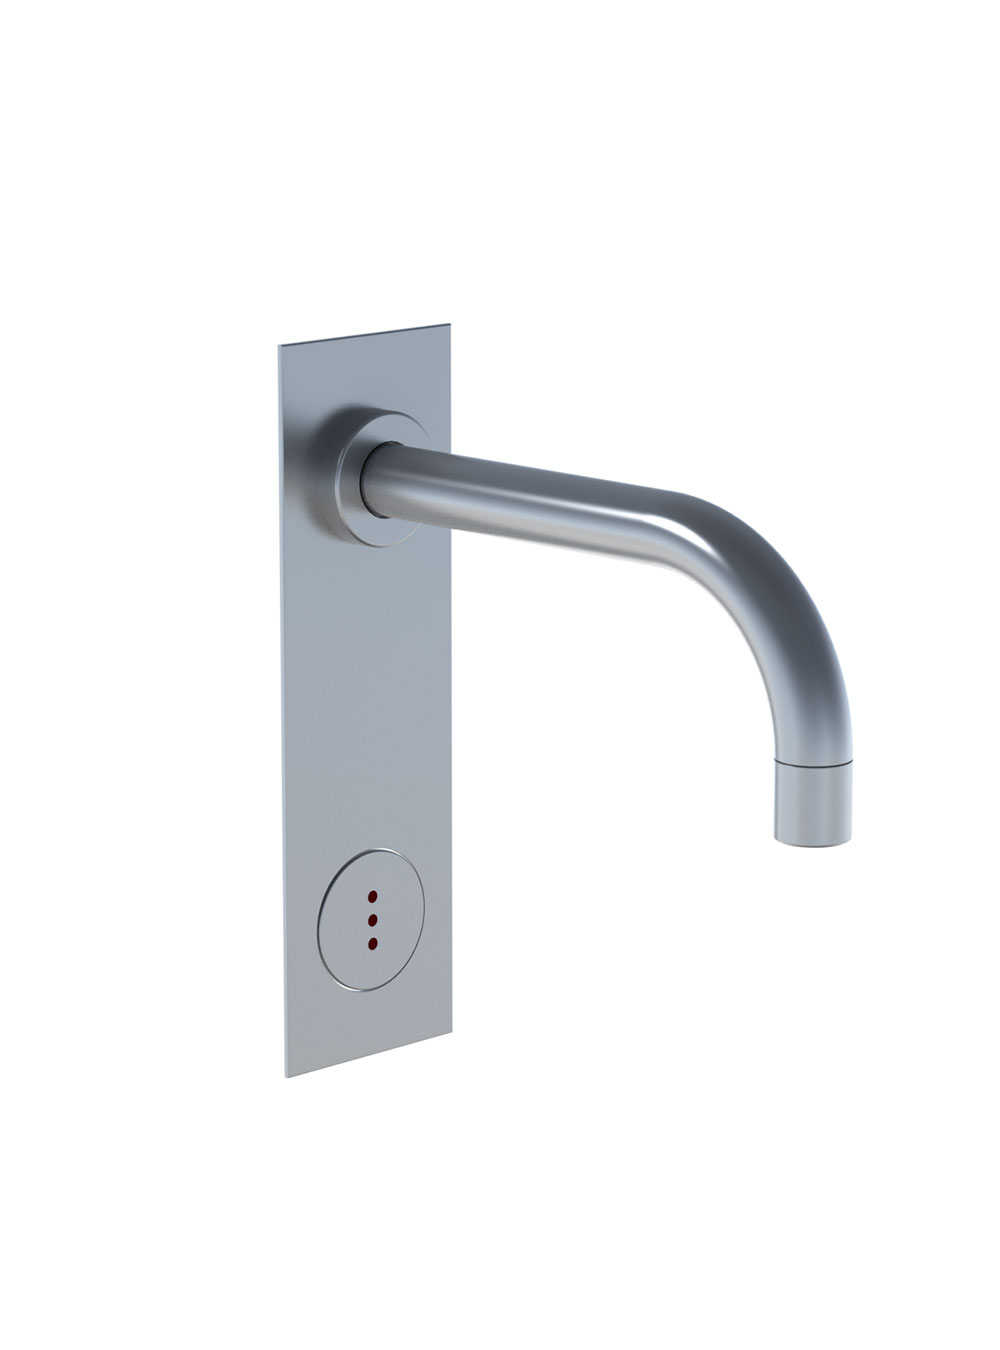 4312: Build-in basin tap with on-off sensor for ‘hands free’ operation. For vertical mounting.Sensor al...